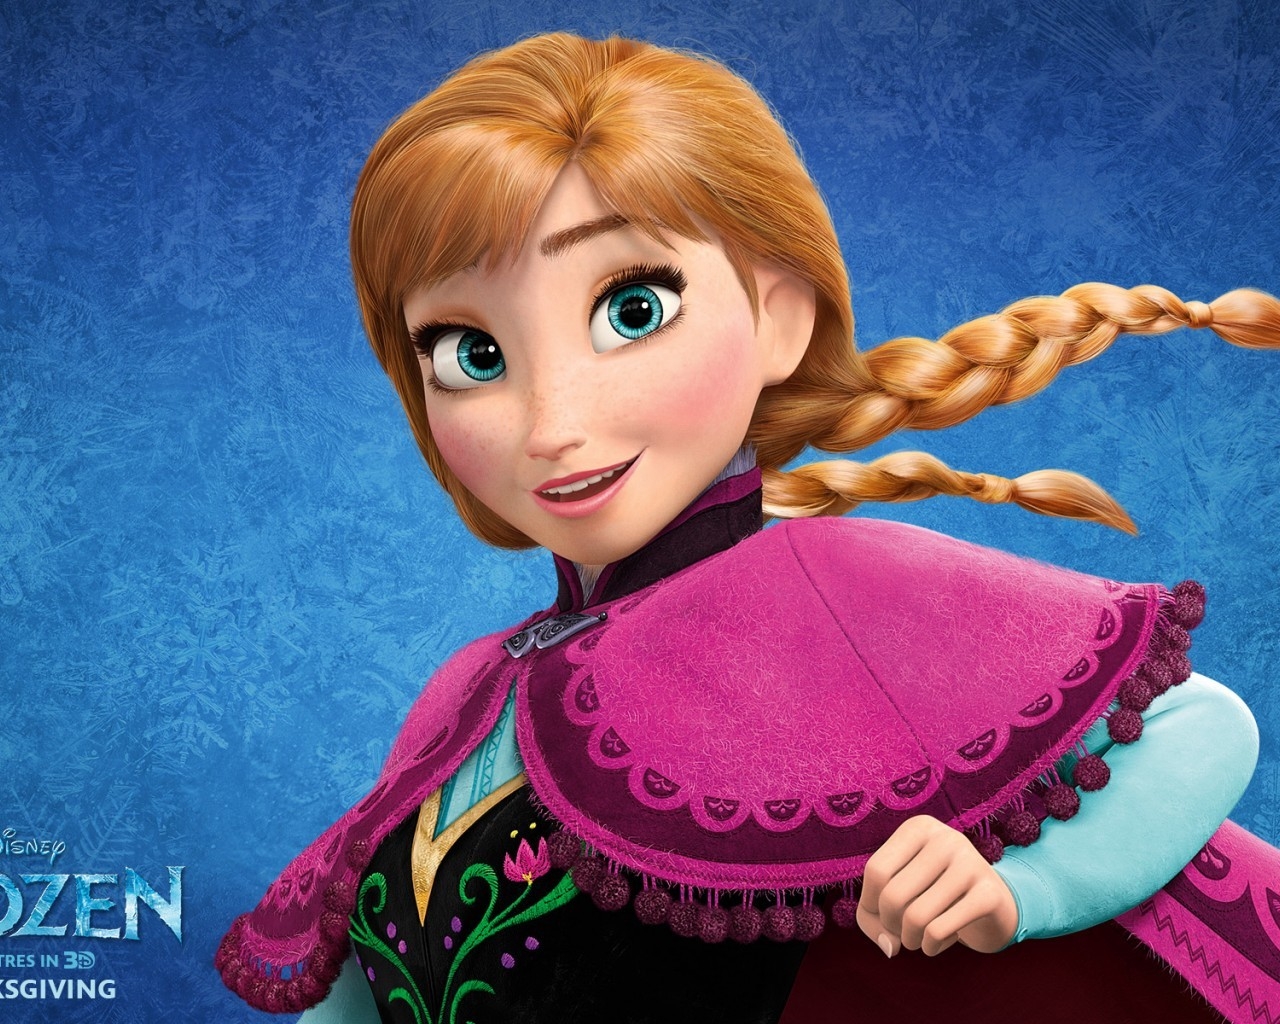 Frozen Movie Character for 1280 x 1024 resolution